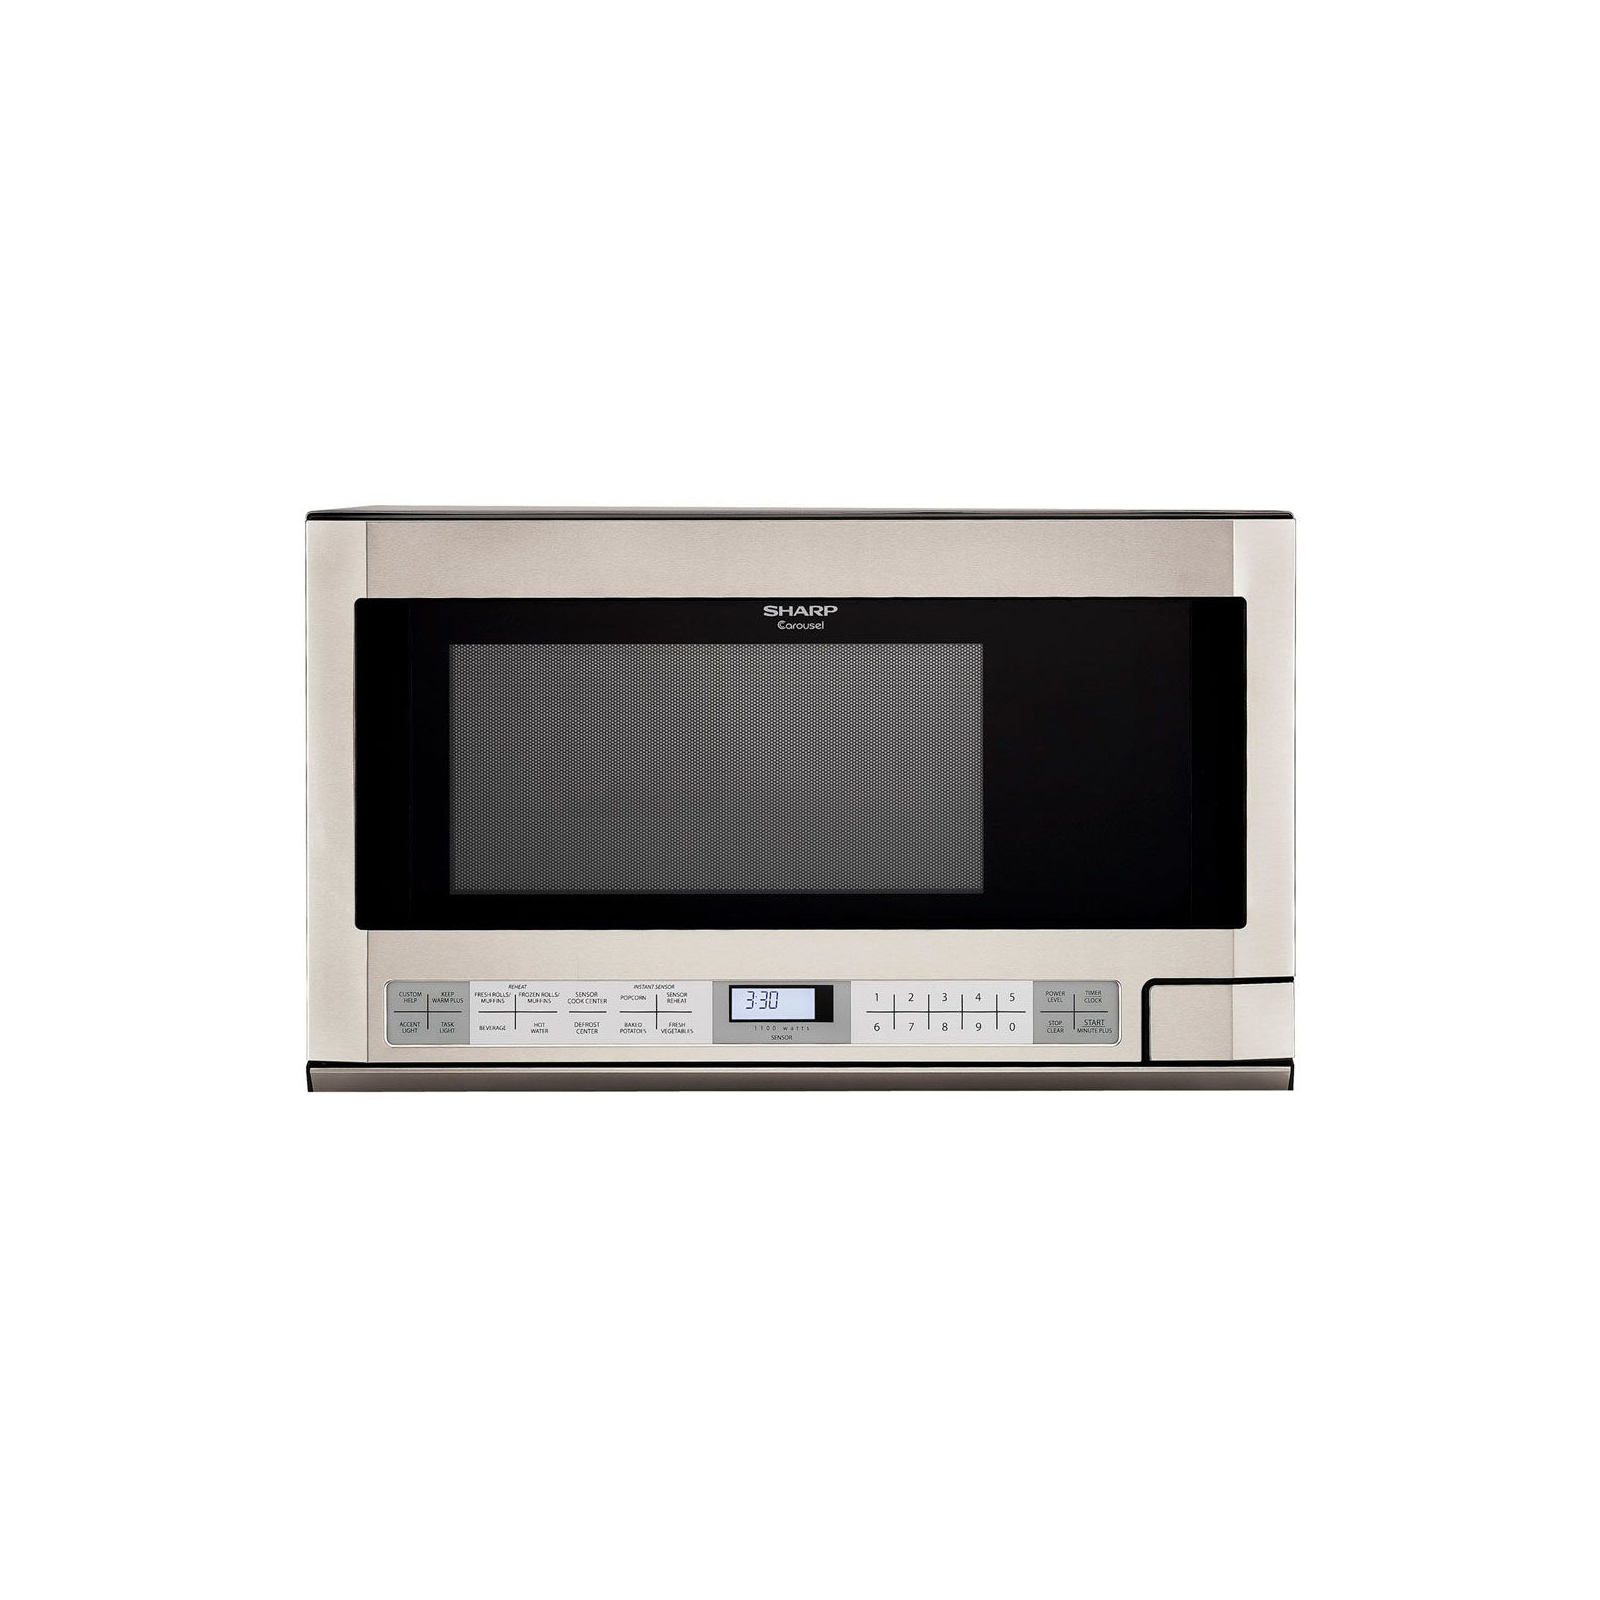 Sharp R1214T 1.5 Cu. Ft. 1100W Over the Counter Microwave - Stainless Steel Stainless Steel Over The Counter Microwave